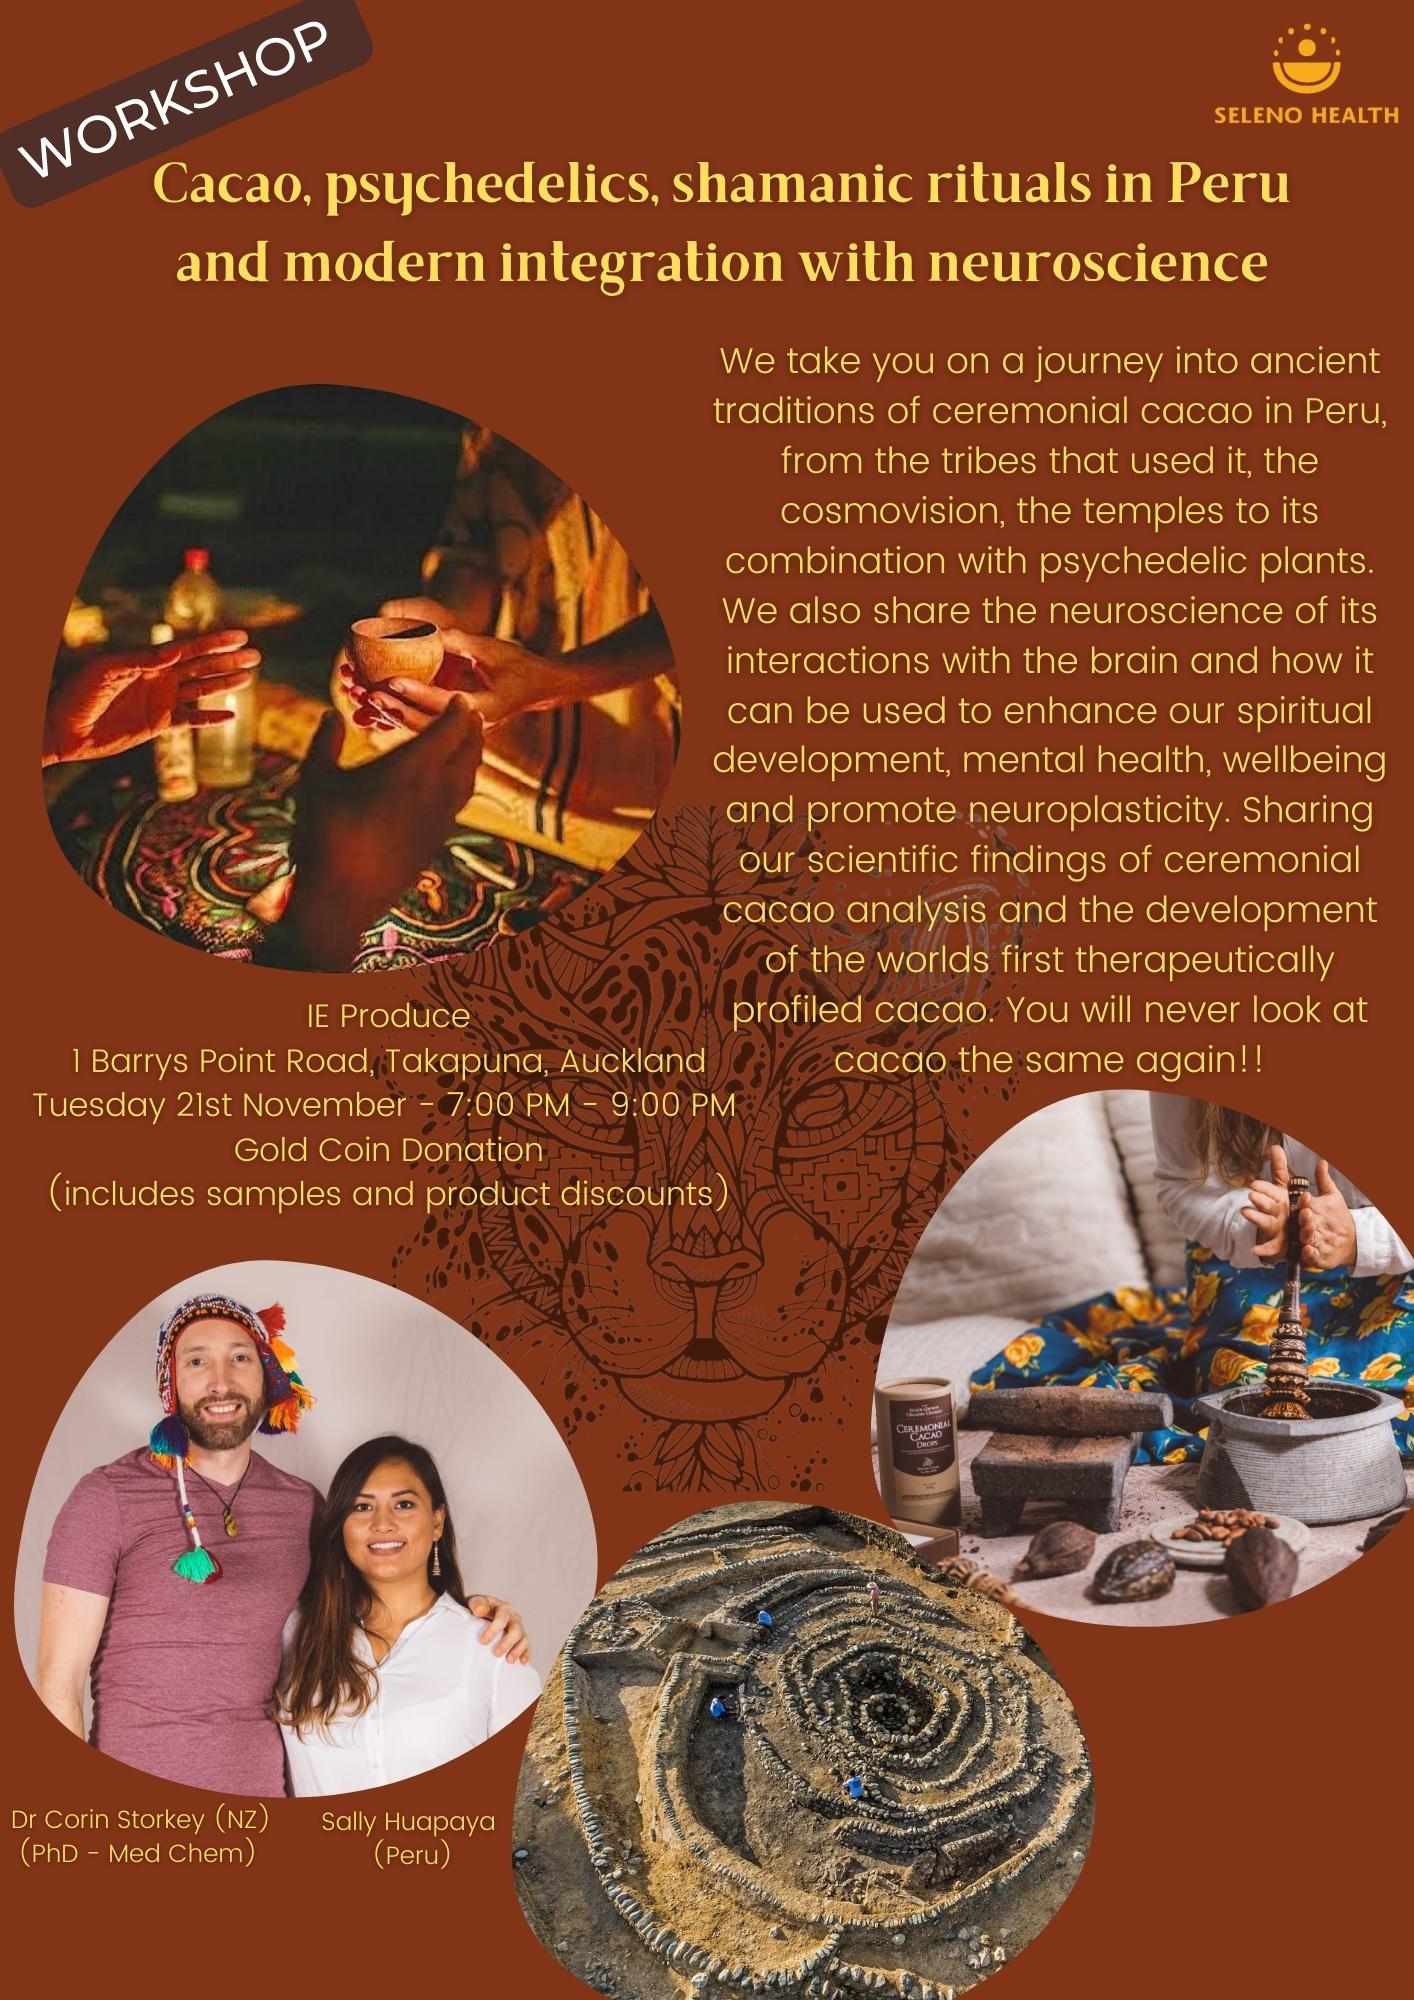 Cacao, Psychedelics, Shamanic Rituals in Peru and Modern Intergration with Neuroscience